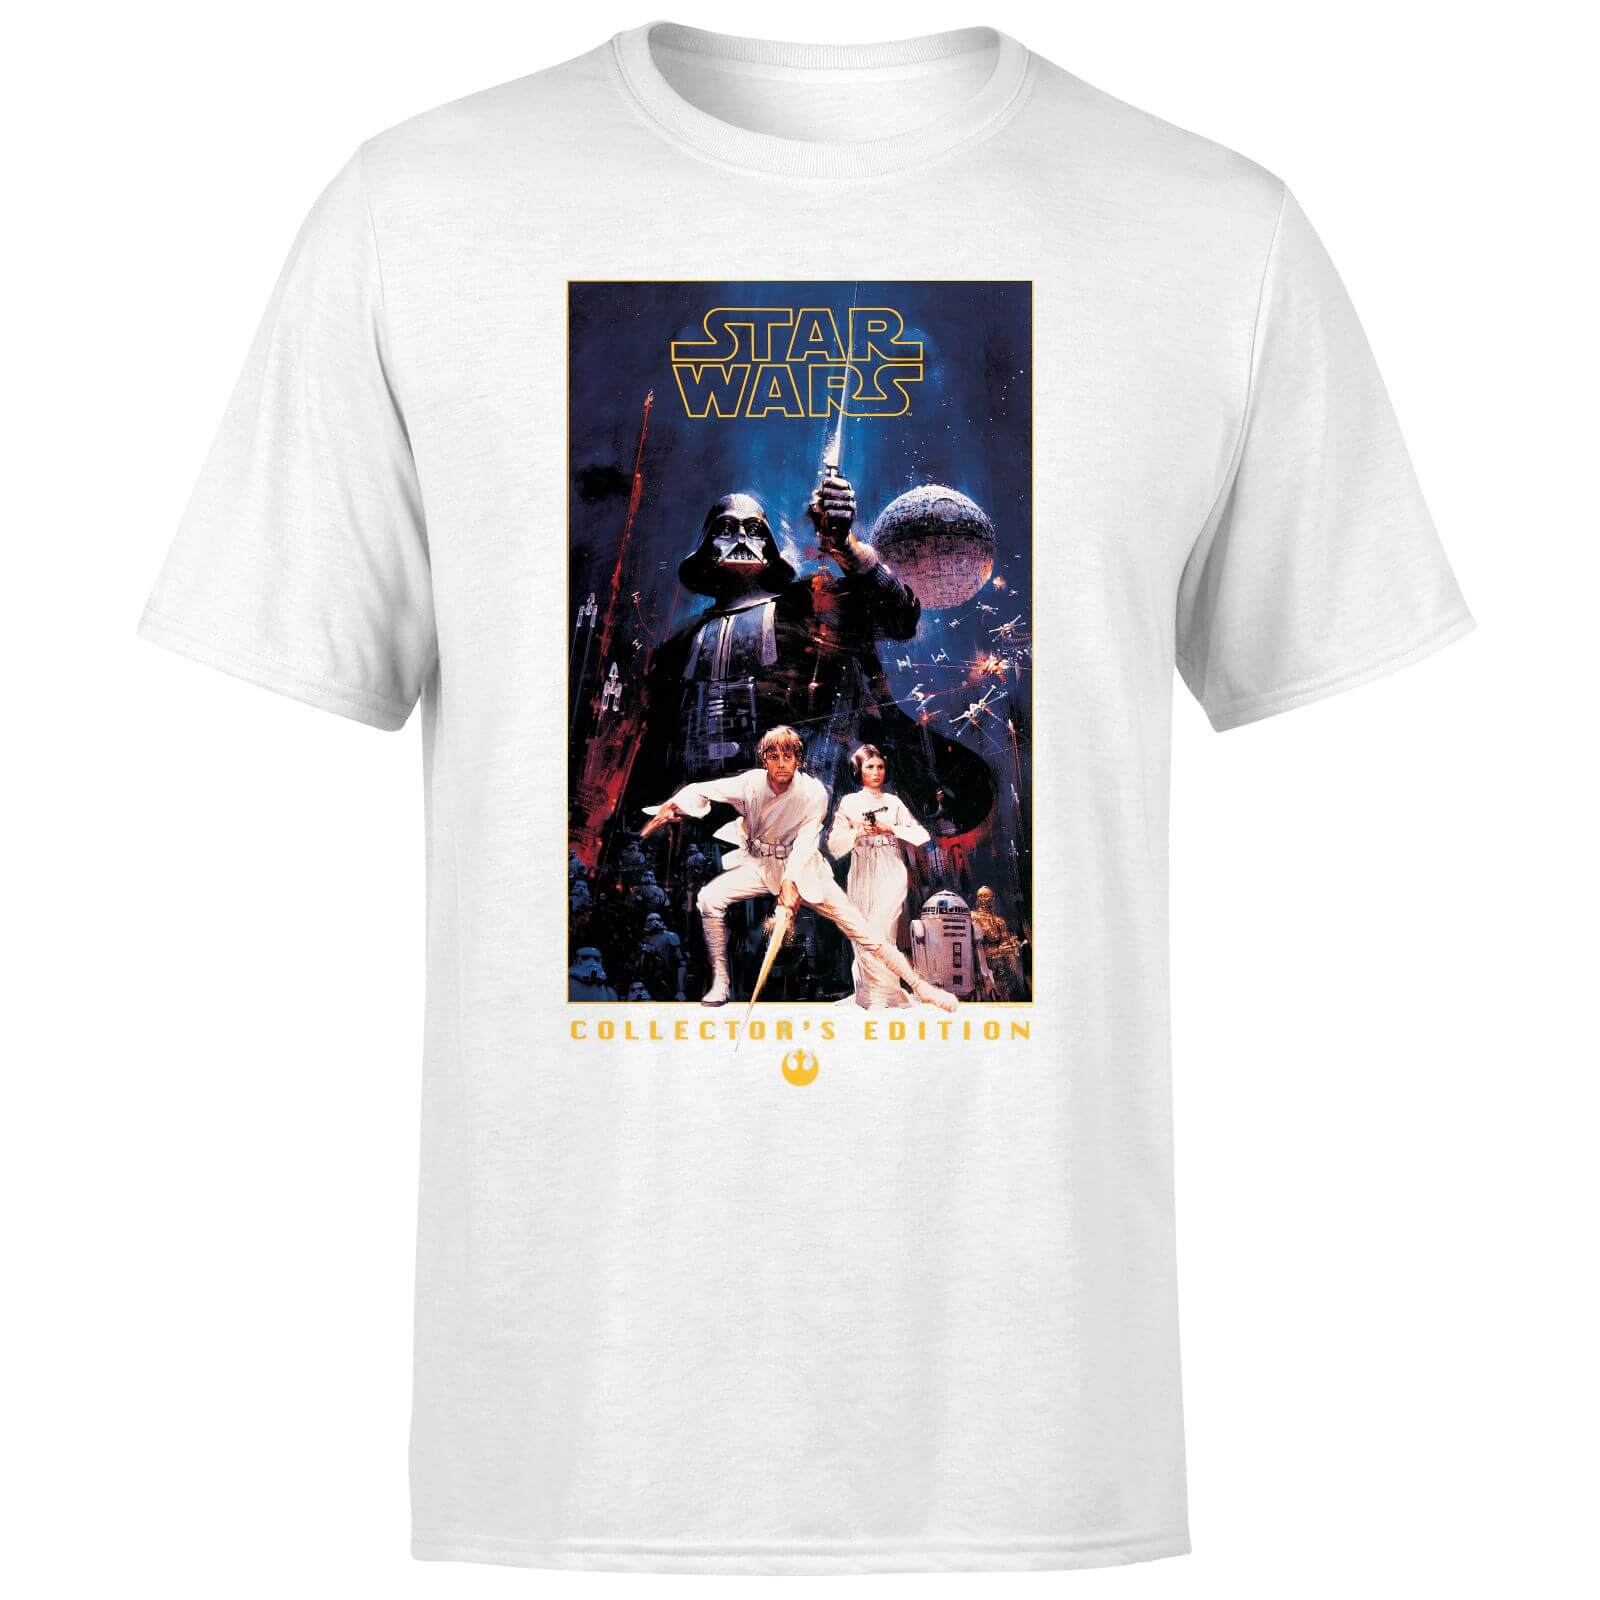 Star Wars Collector's Edition T-Shirt - White - XS